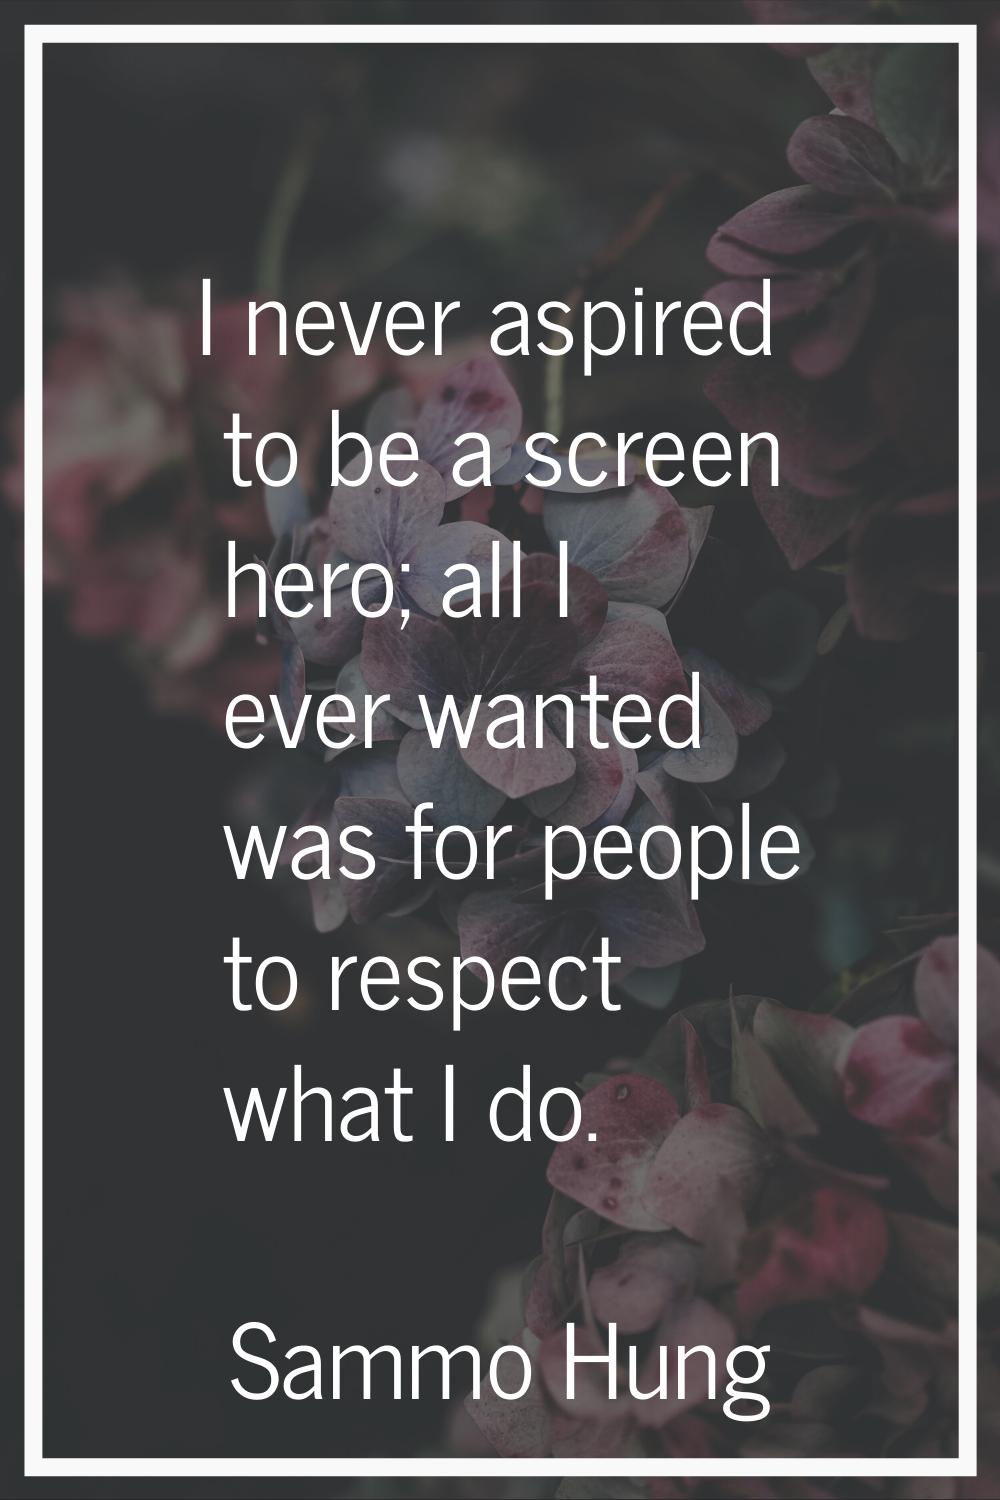 I never aspired to be a screen hero; all I ever wanted was for people to respect what I do.